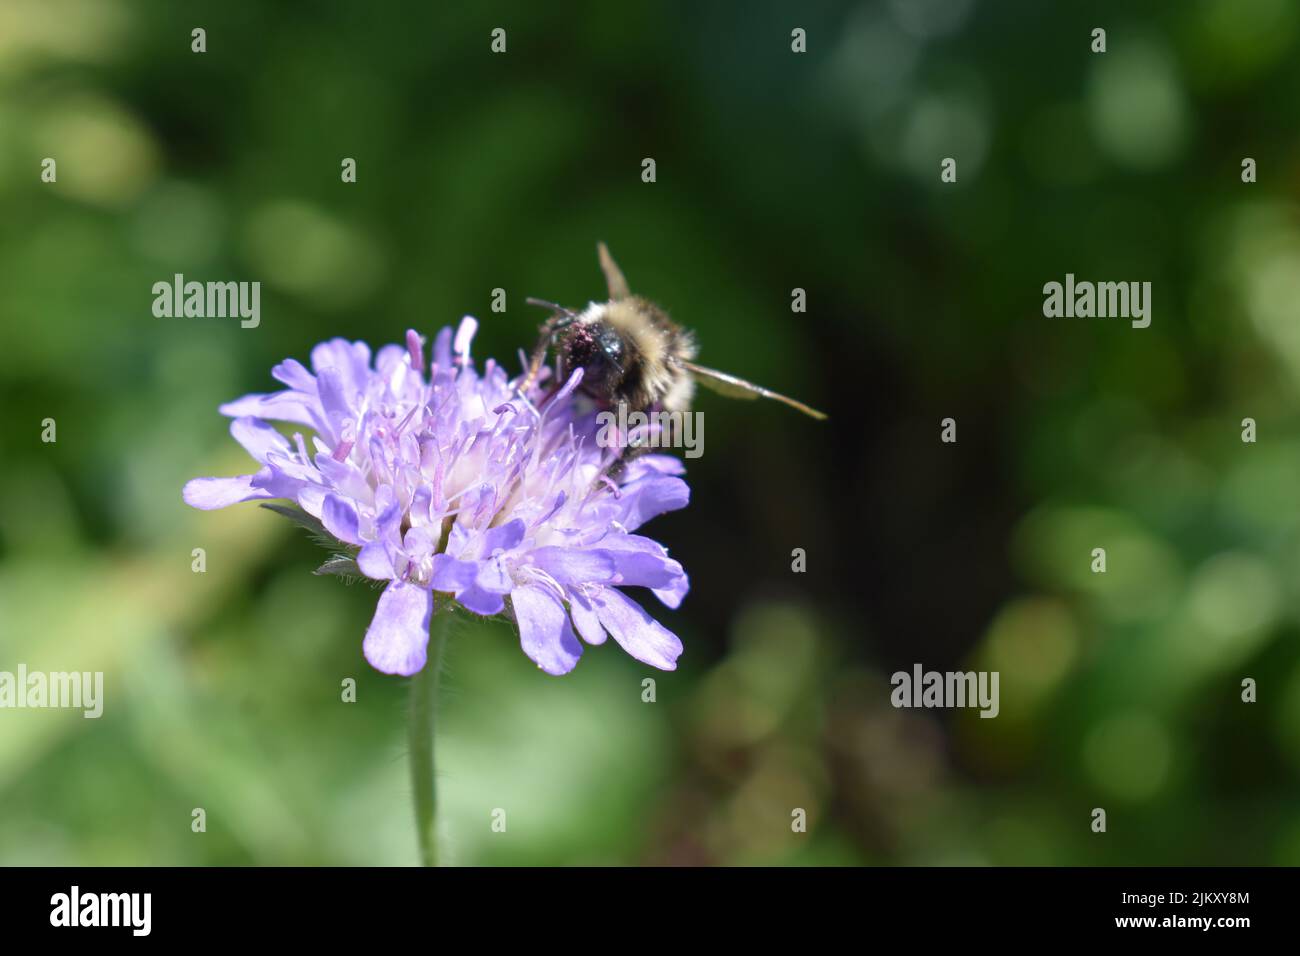 A close up shot of a bee on a flower - Scabiosa 'Butterfly Blue'. Stock Photo